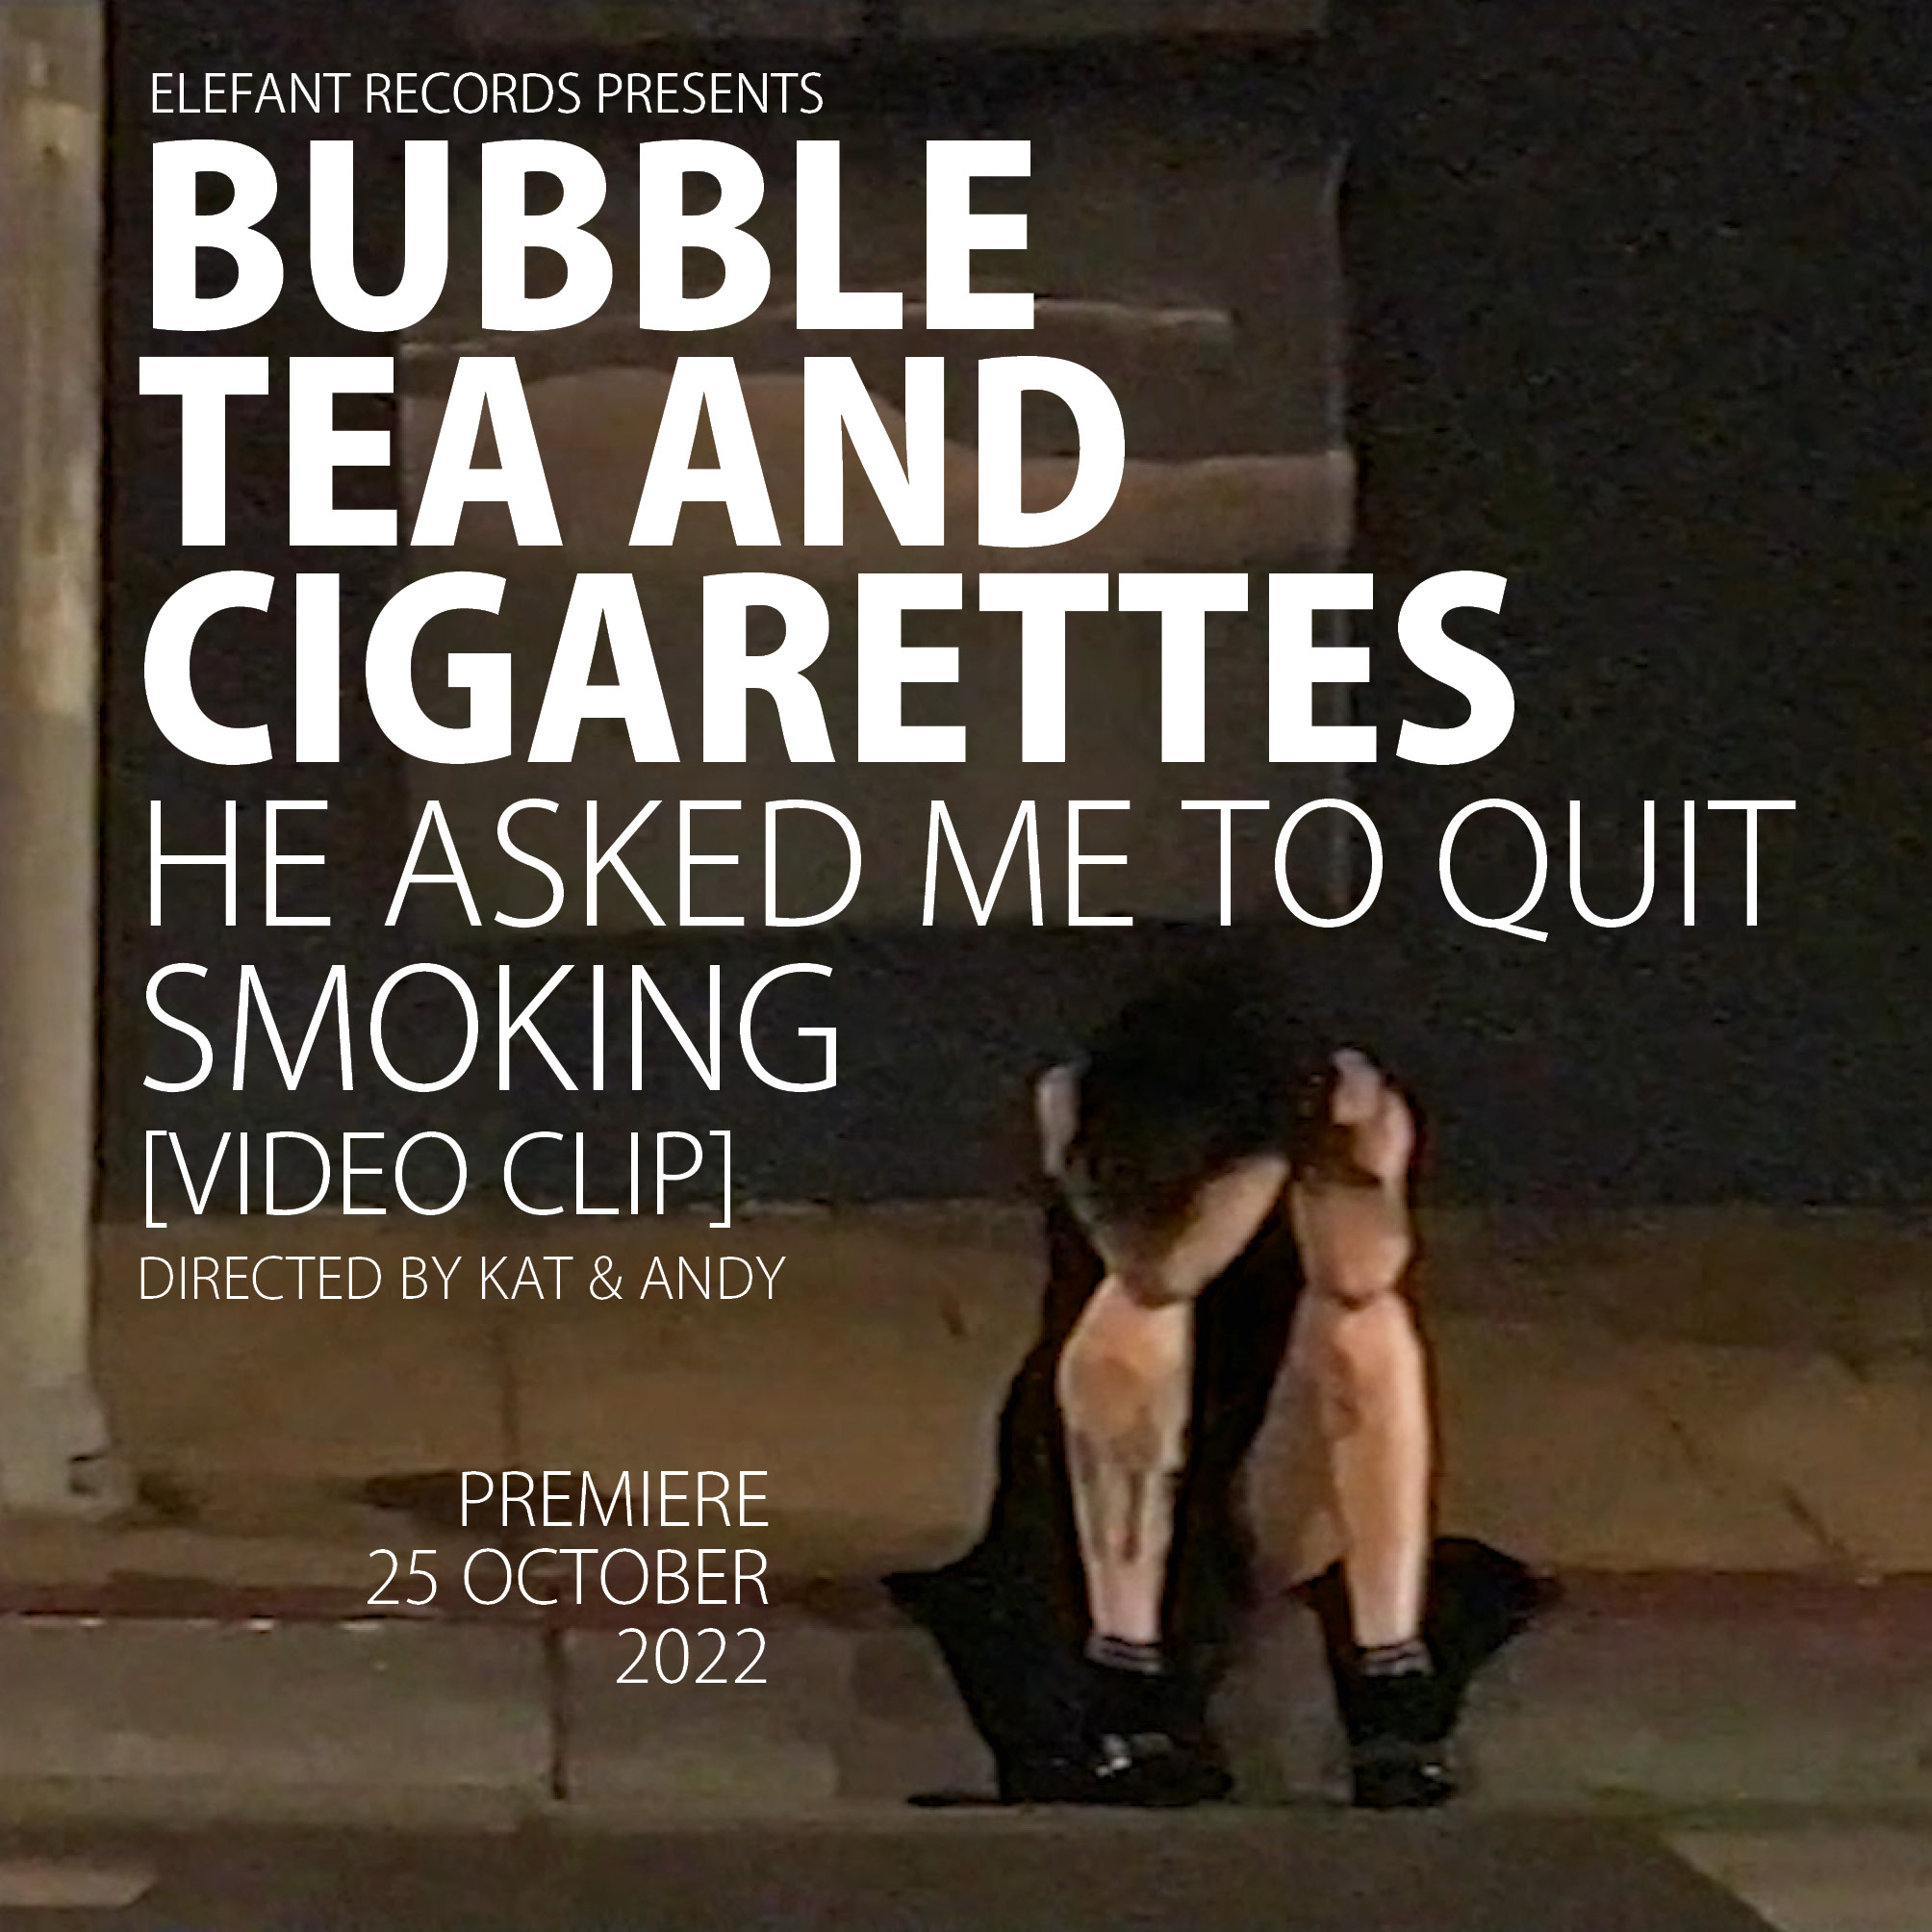 BUBBLE TEA AND CIGARETTES "He Asked Me To Quit Smoking" Video-clip